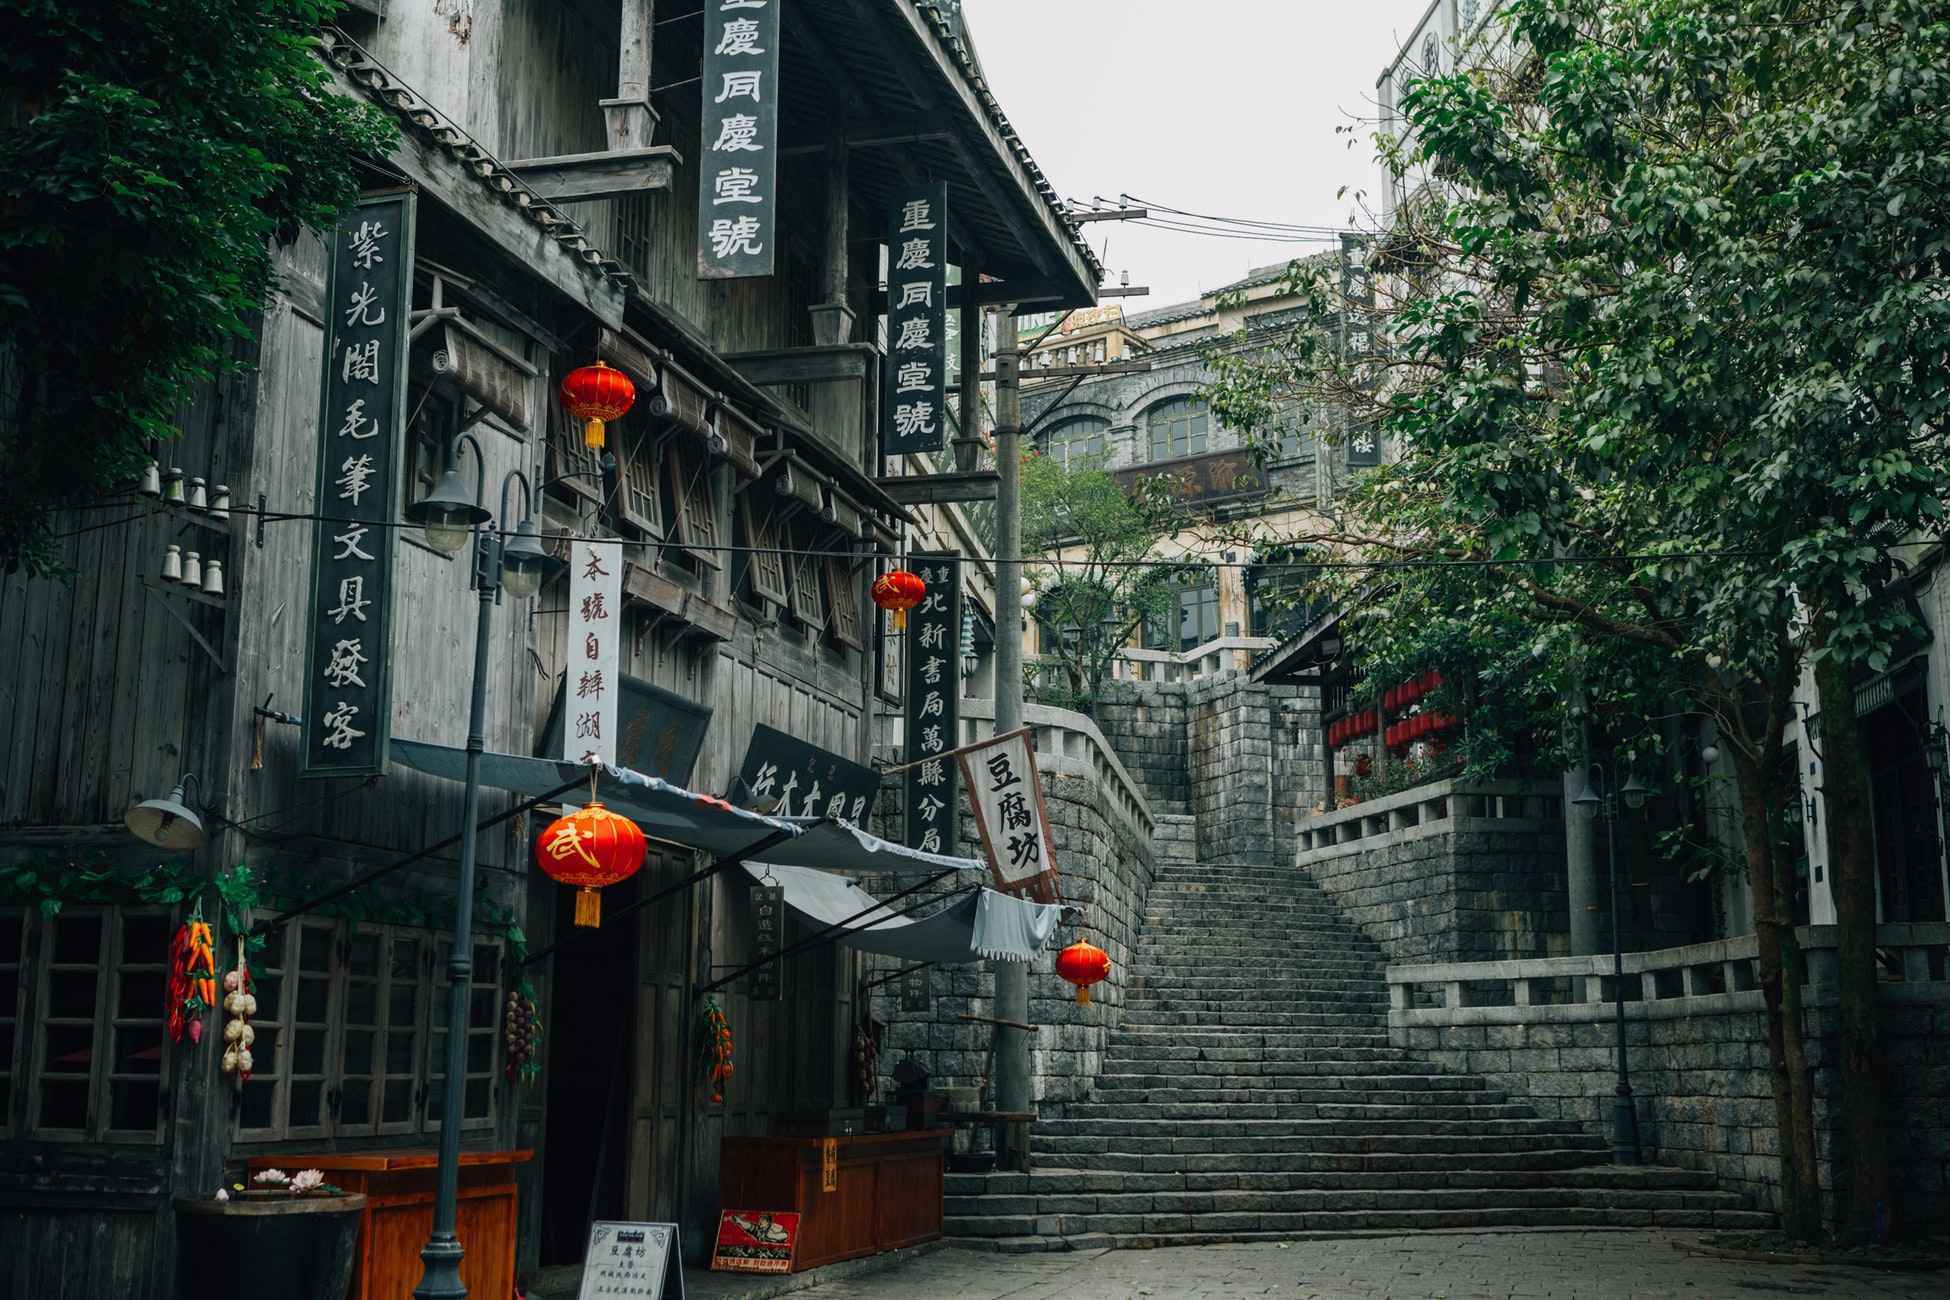 alleyway with old building and chinese lanterns